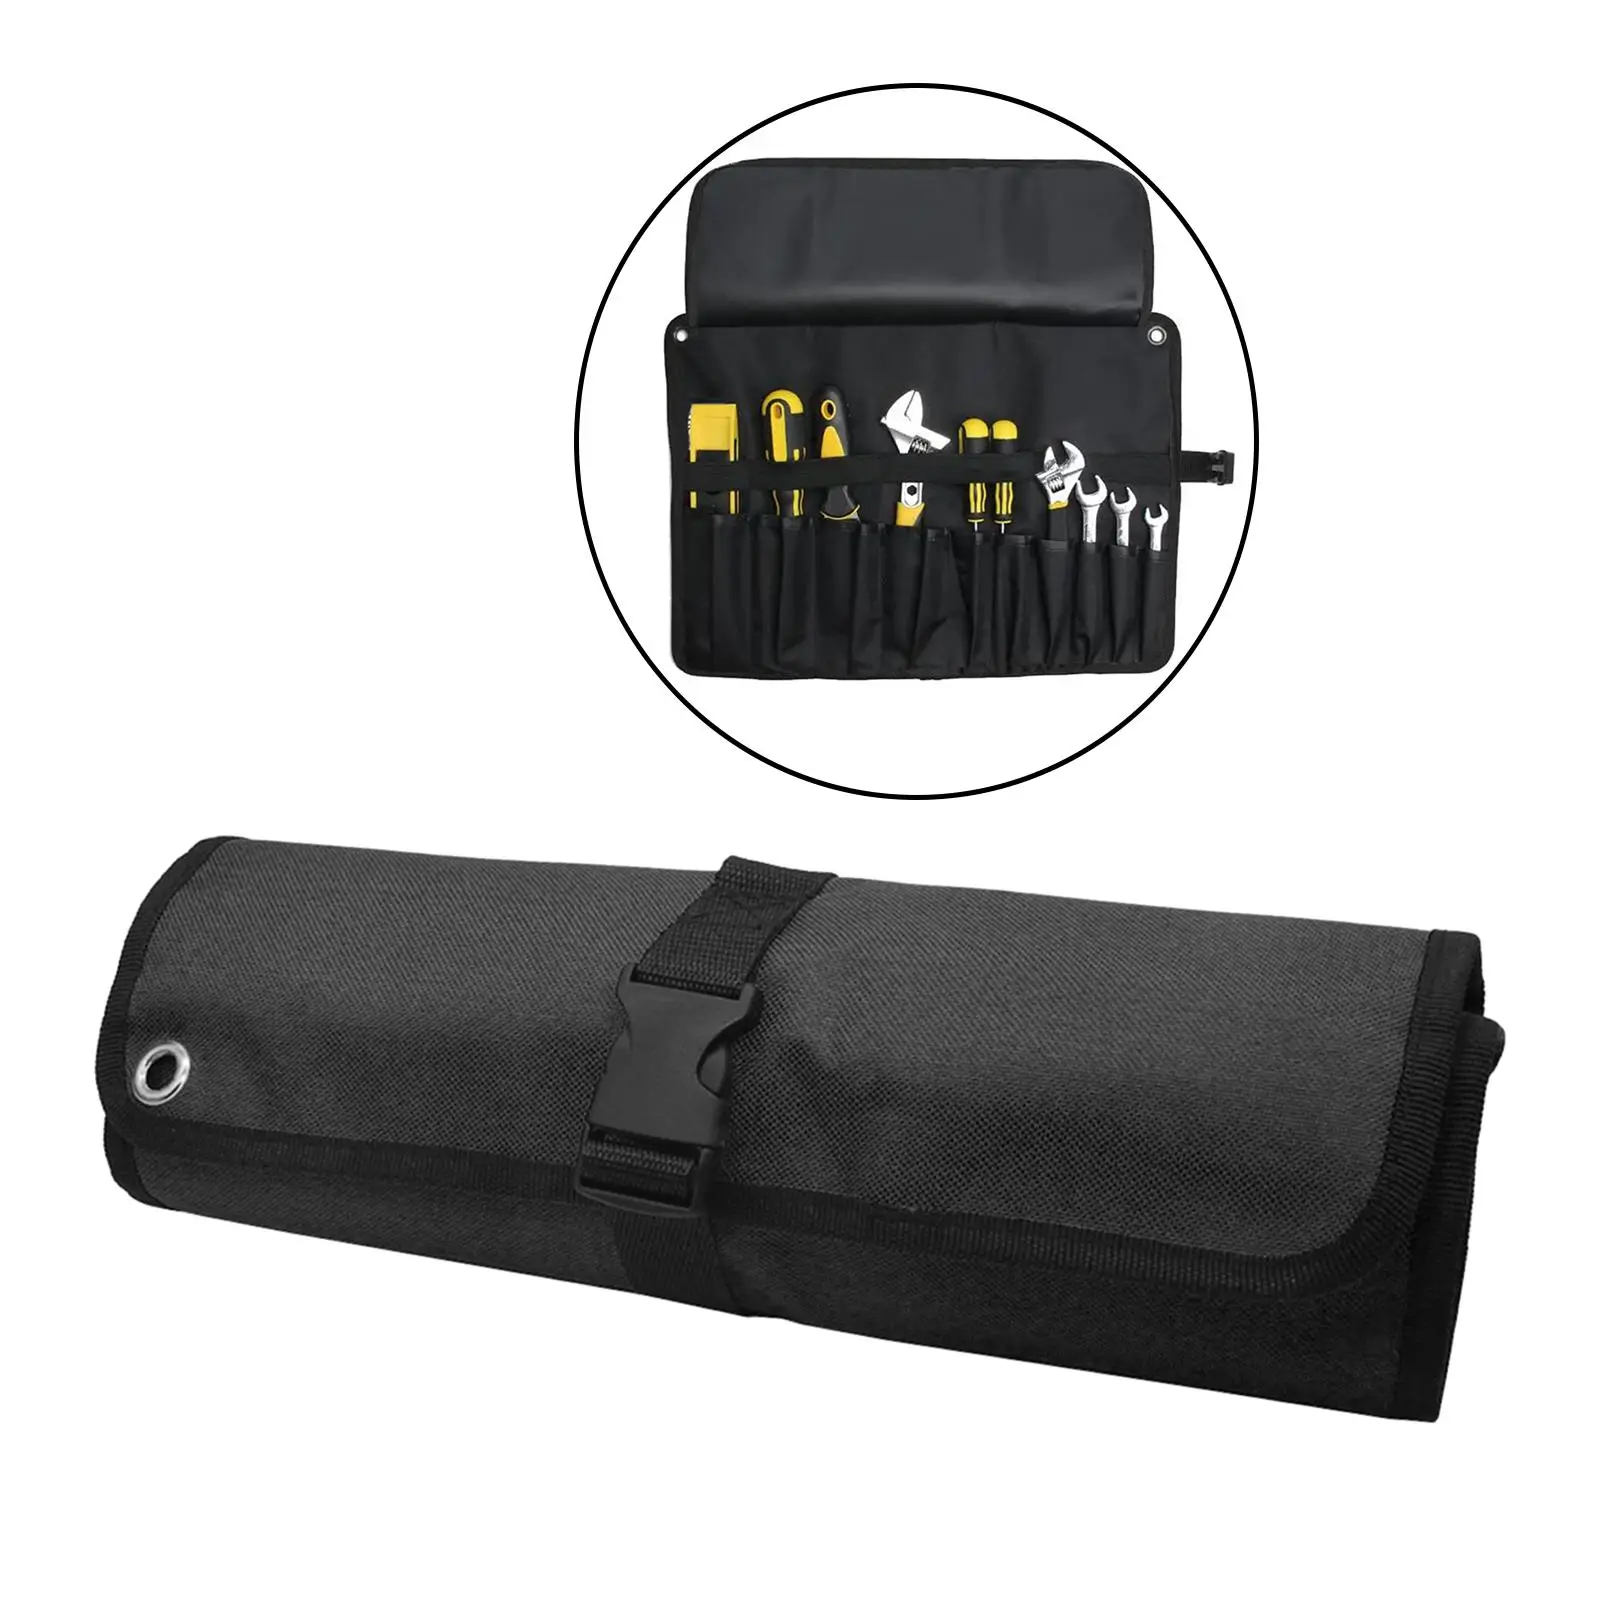 Roll Tool Pouch Rolling Tool Bag Multifunction Portable Organizer Carry Case Storage Bag Holder for Plumbers Carpenters